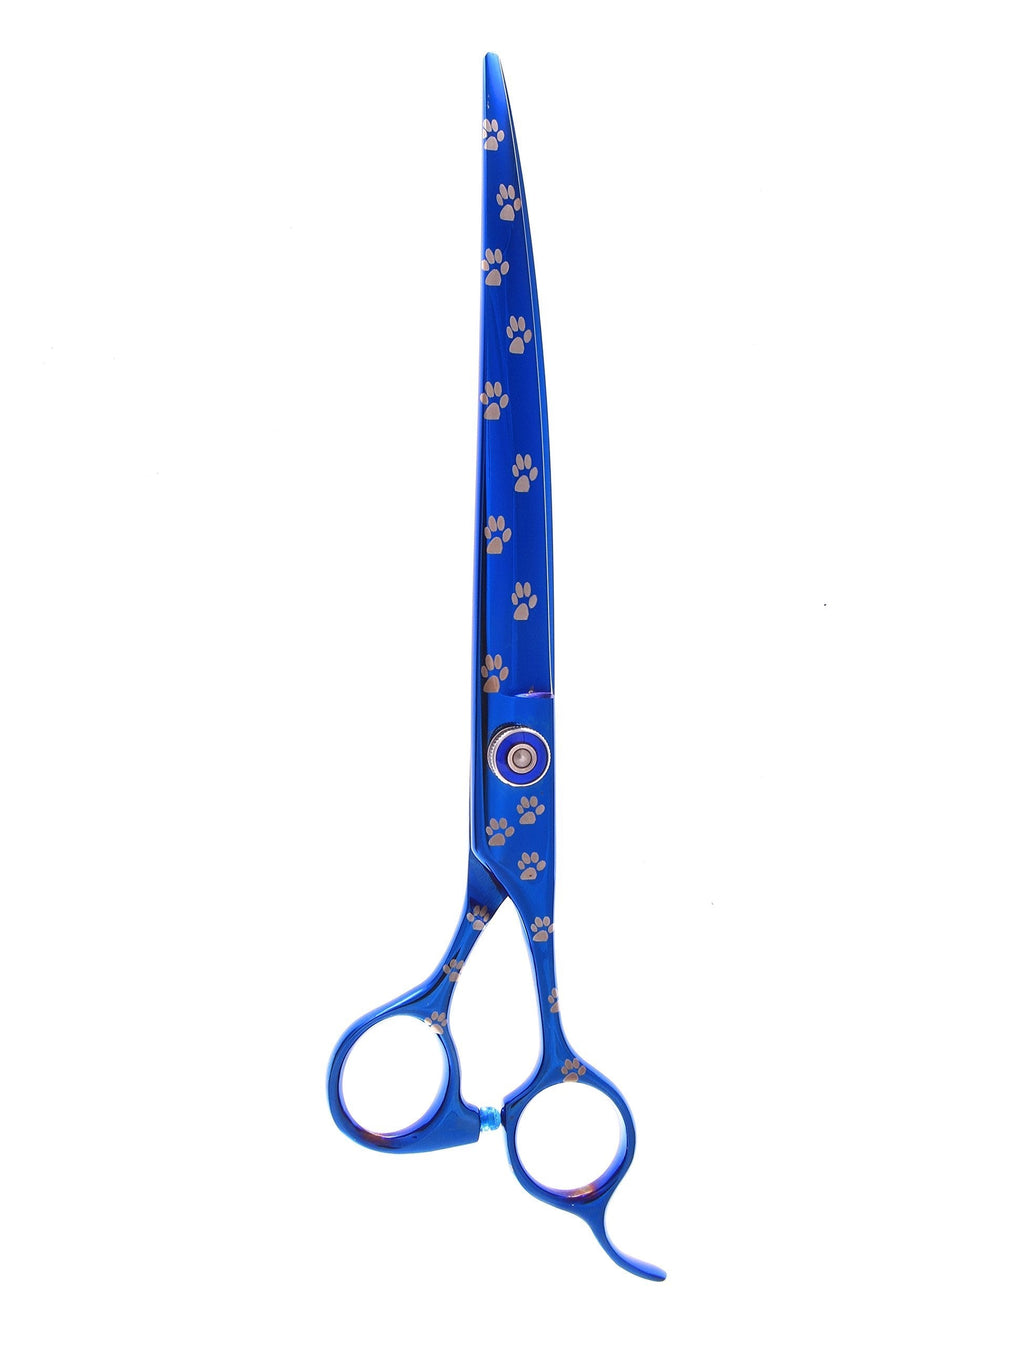 [Australia] - ShearsDirect Japanese Stainless Curved Blue Titanium with Paw Prints, Professional Cutting Shear with Blue Tension Knob, Fixed Finger Rest, 8.0-Inch Curved 